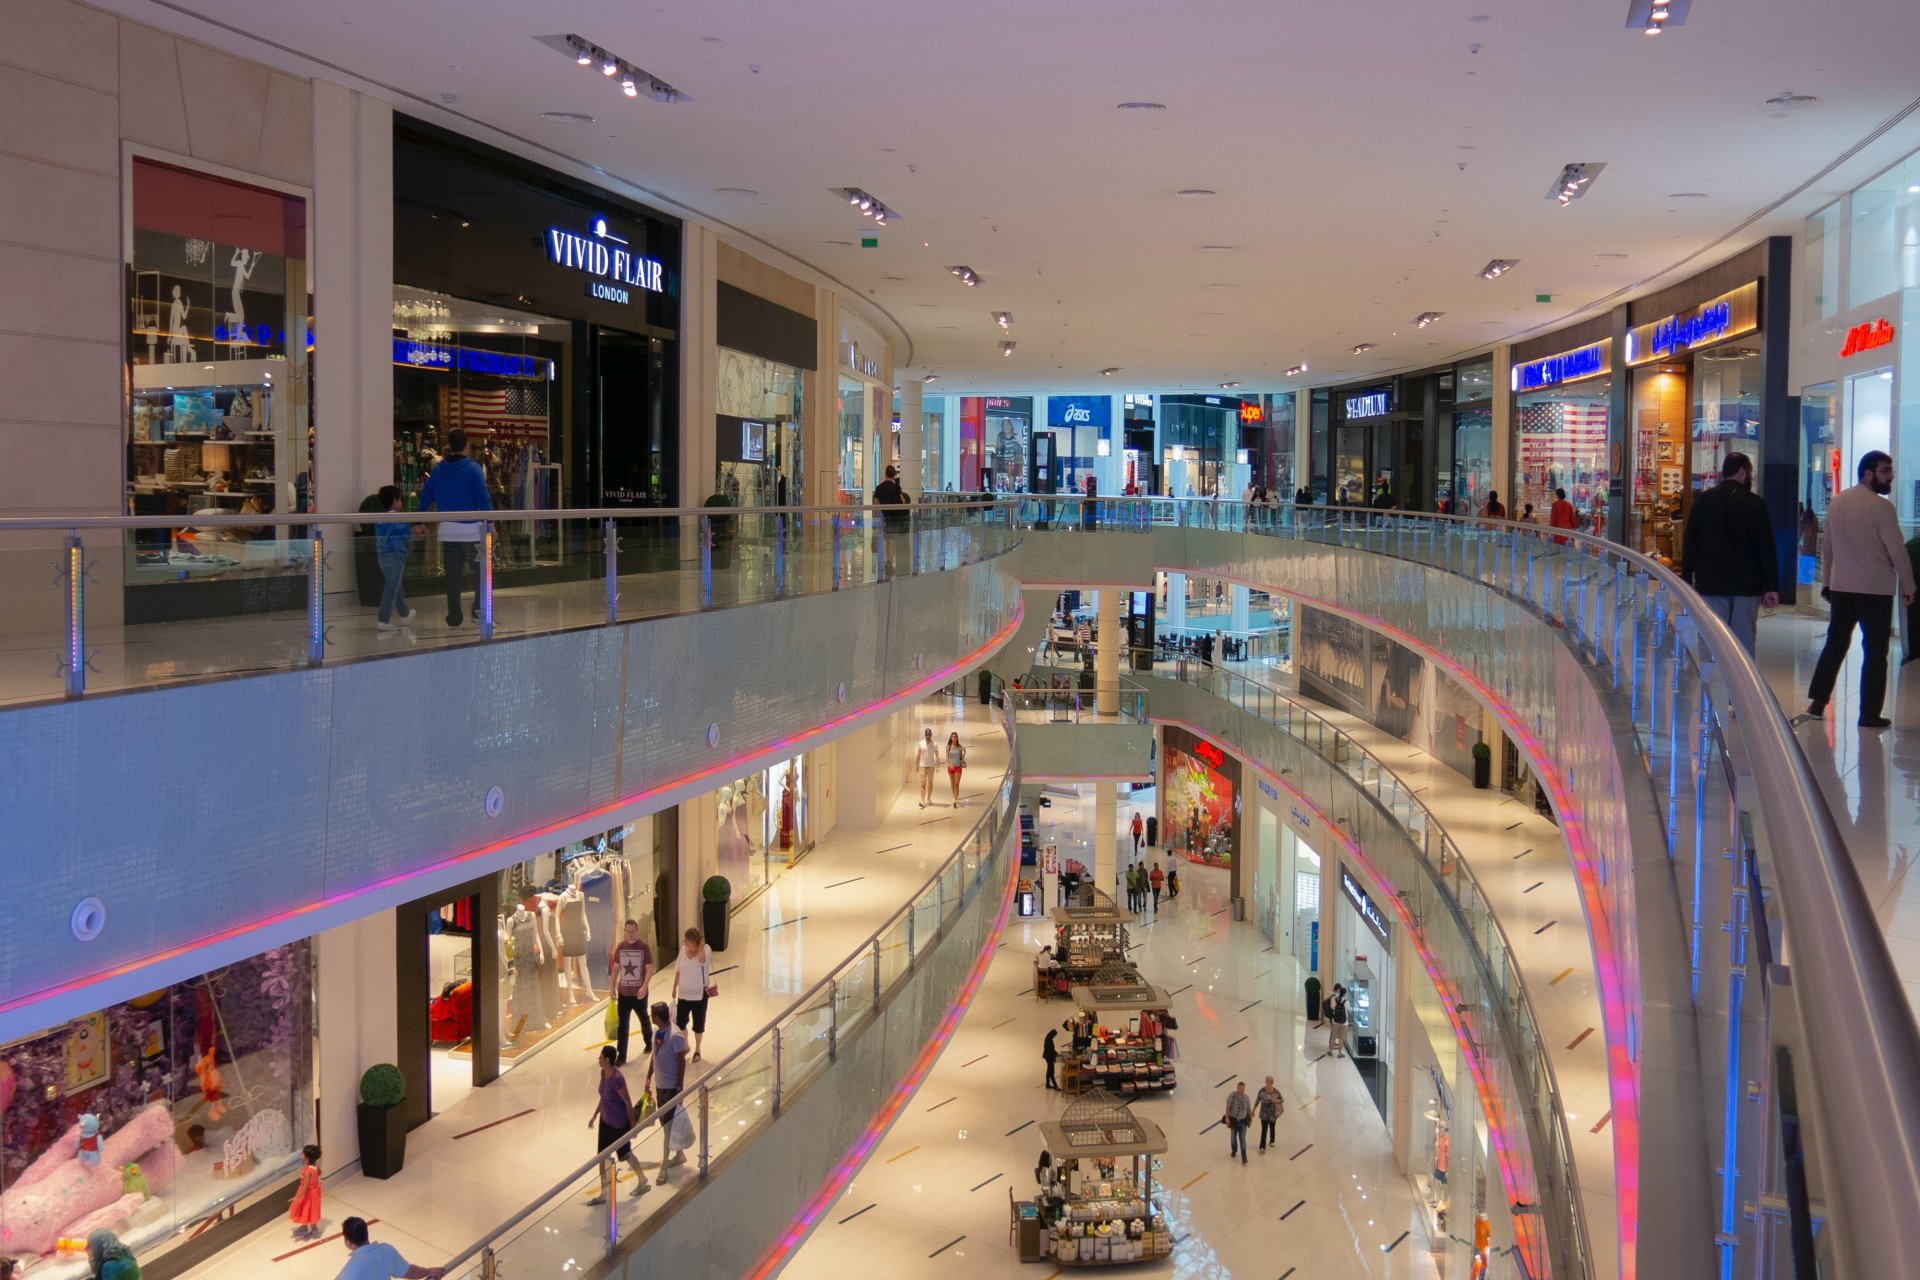 Pedestrians walk through a three-level mall with white ceilings and floors and colorful lighting.